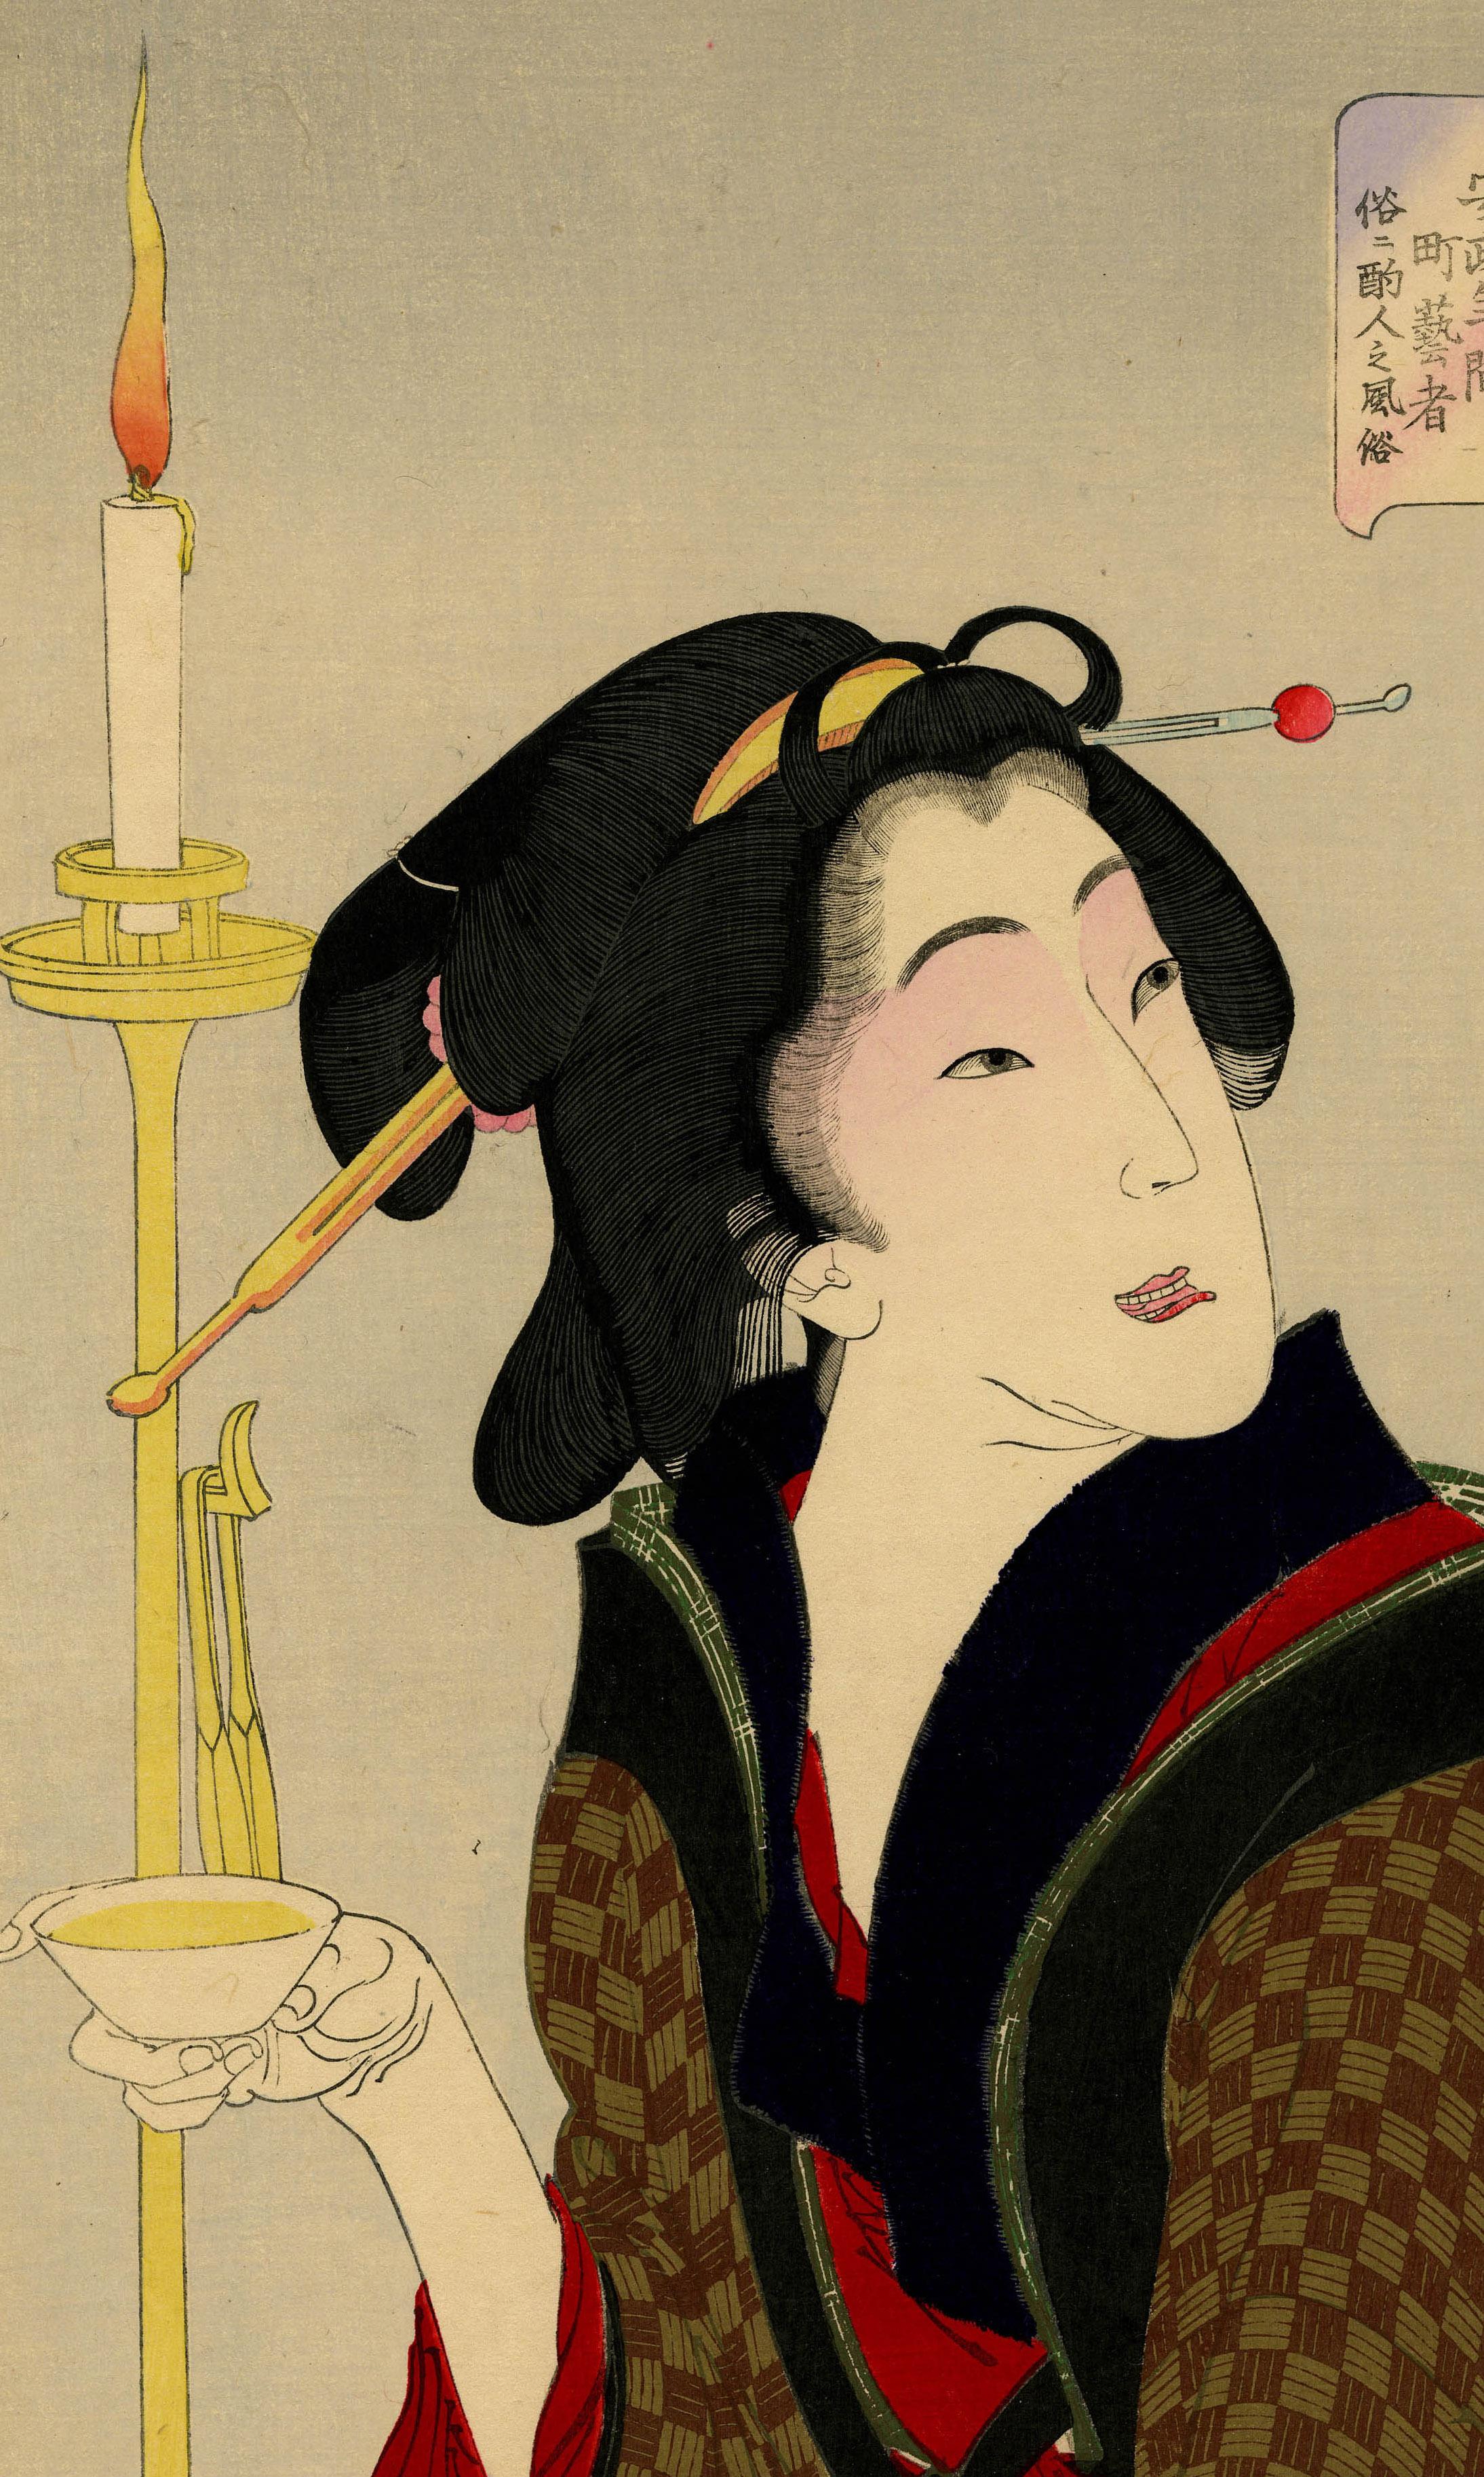 Thirsty: The Appearance of a Town Geisha - a So-Called Wine- Server - in der Anse (Showa), Print, von Taiso Yoshitoshi